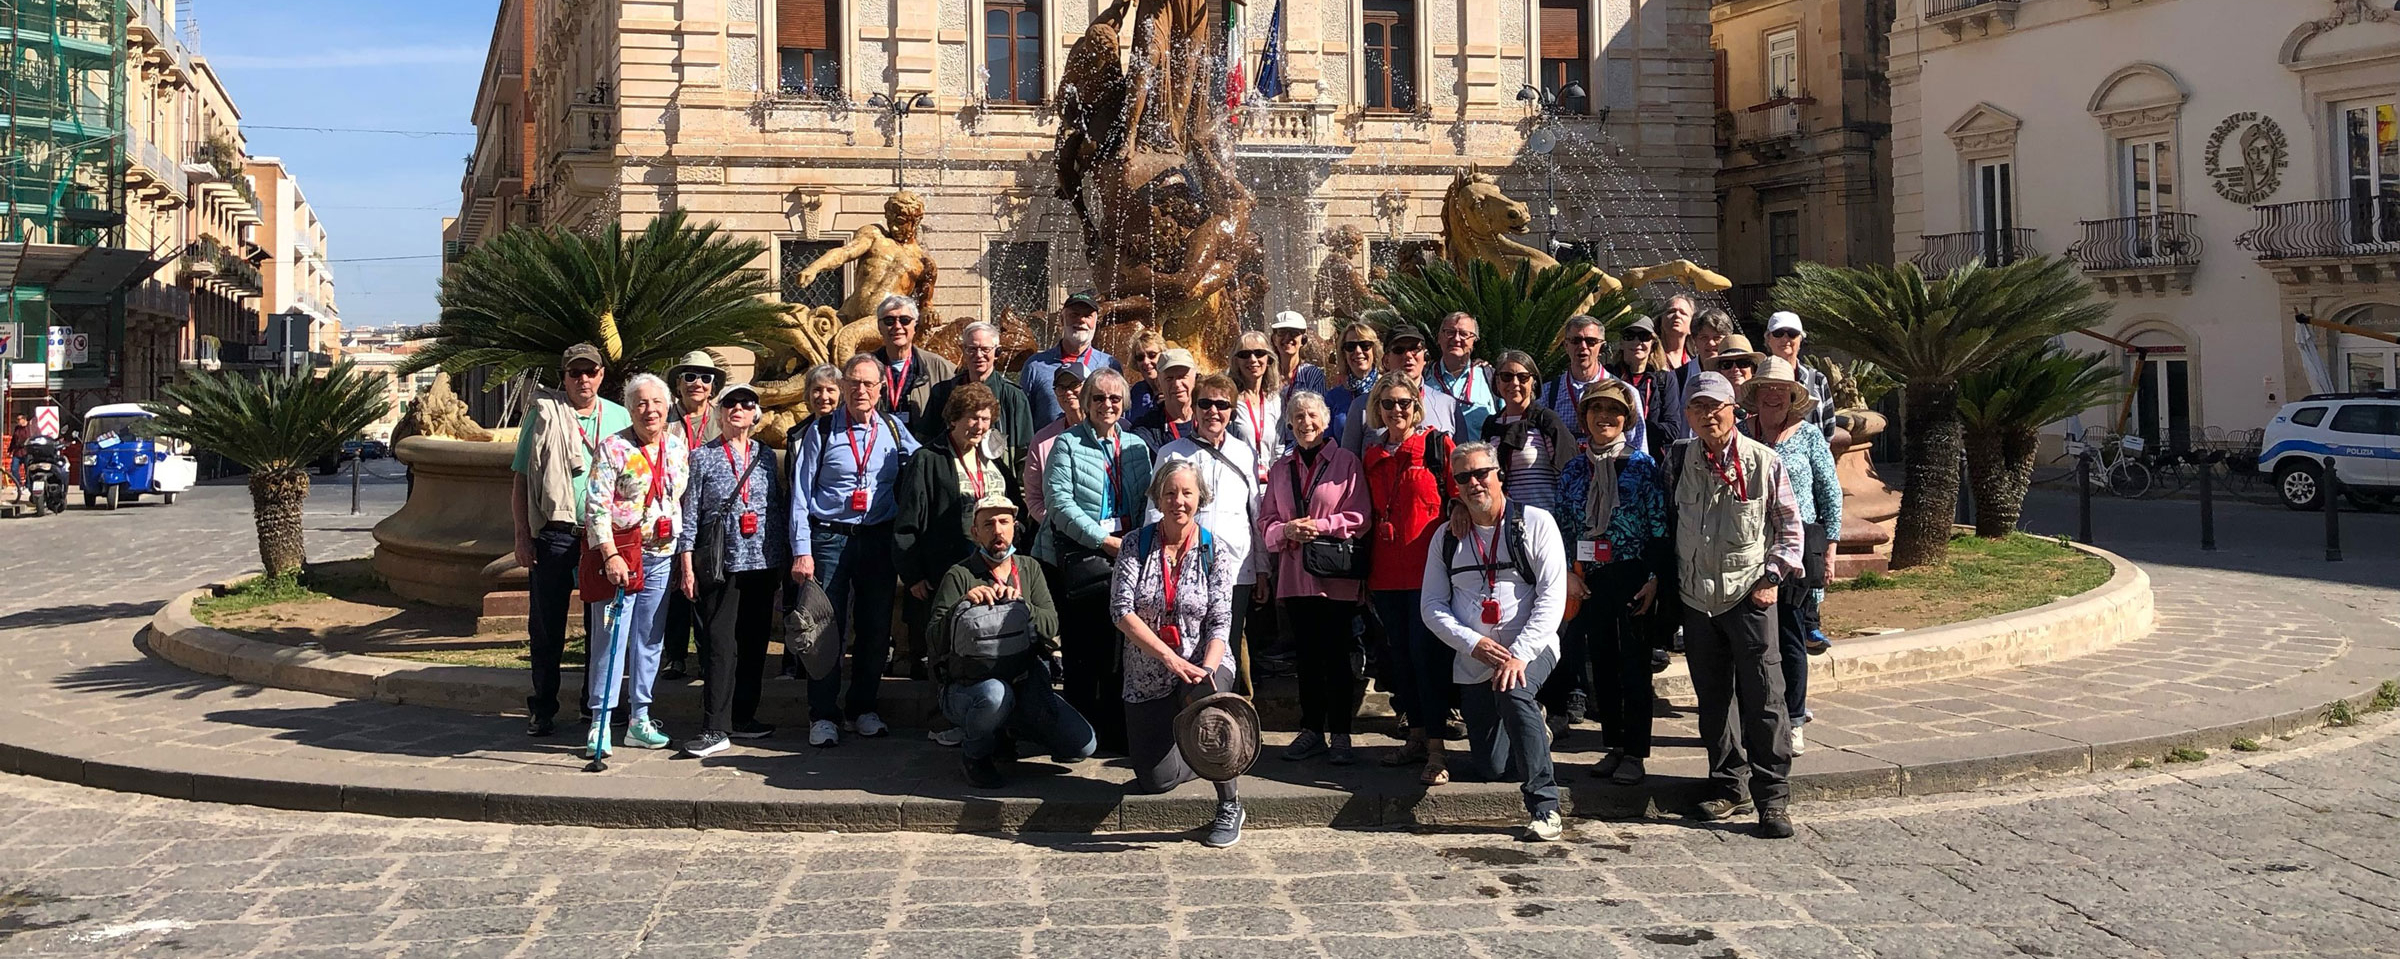 OLLI members in front of a fountain in Sicily